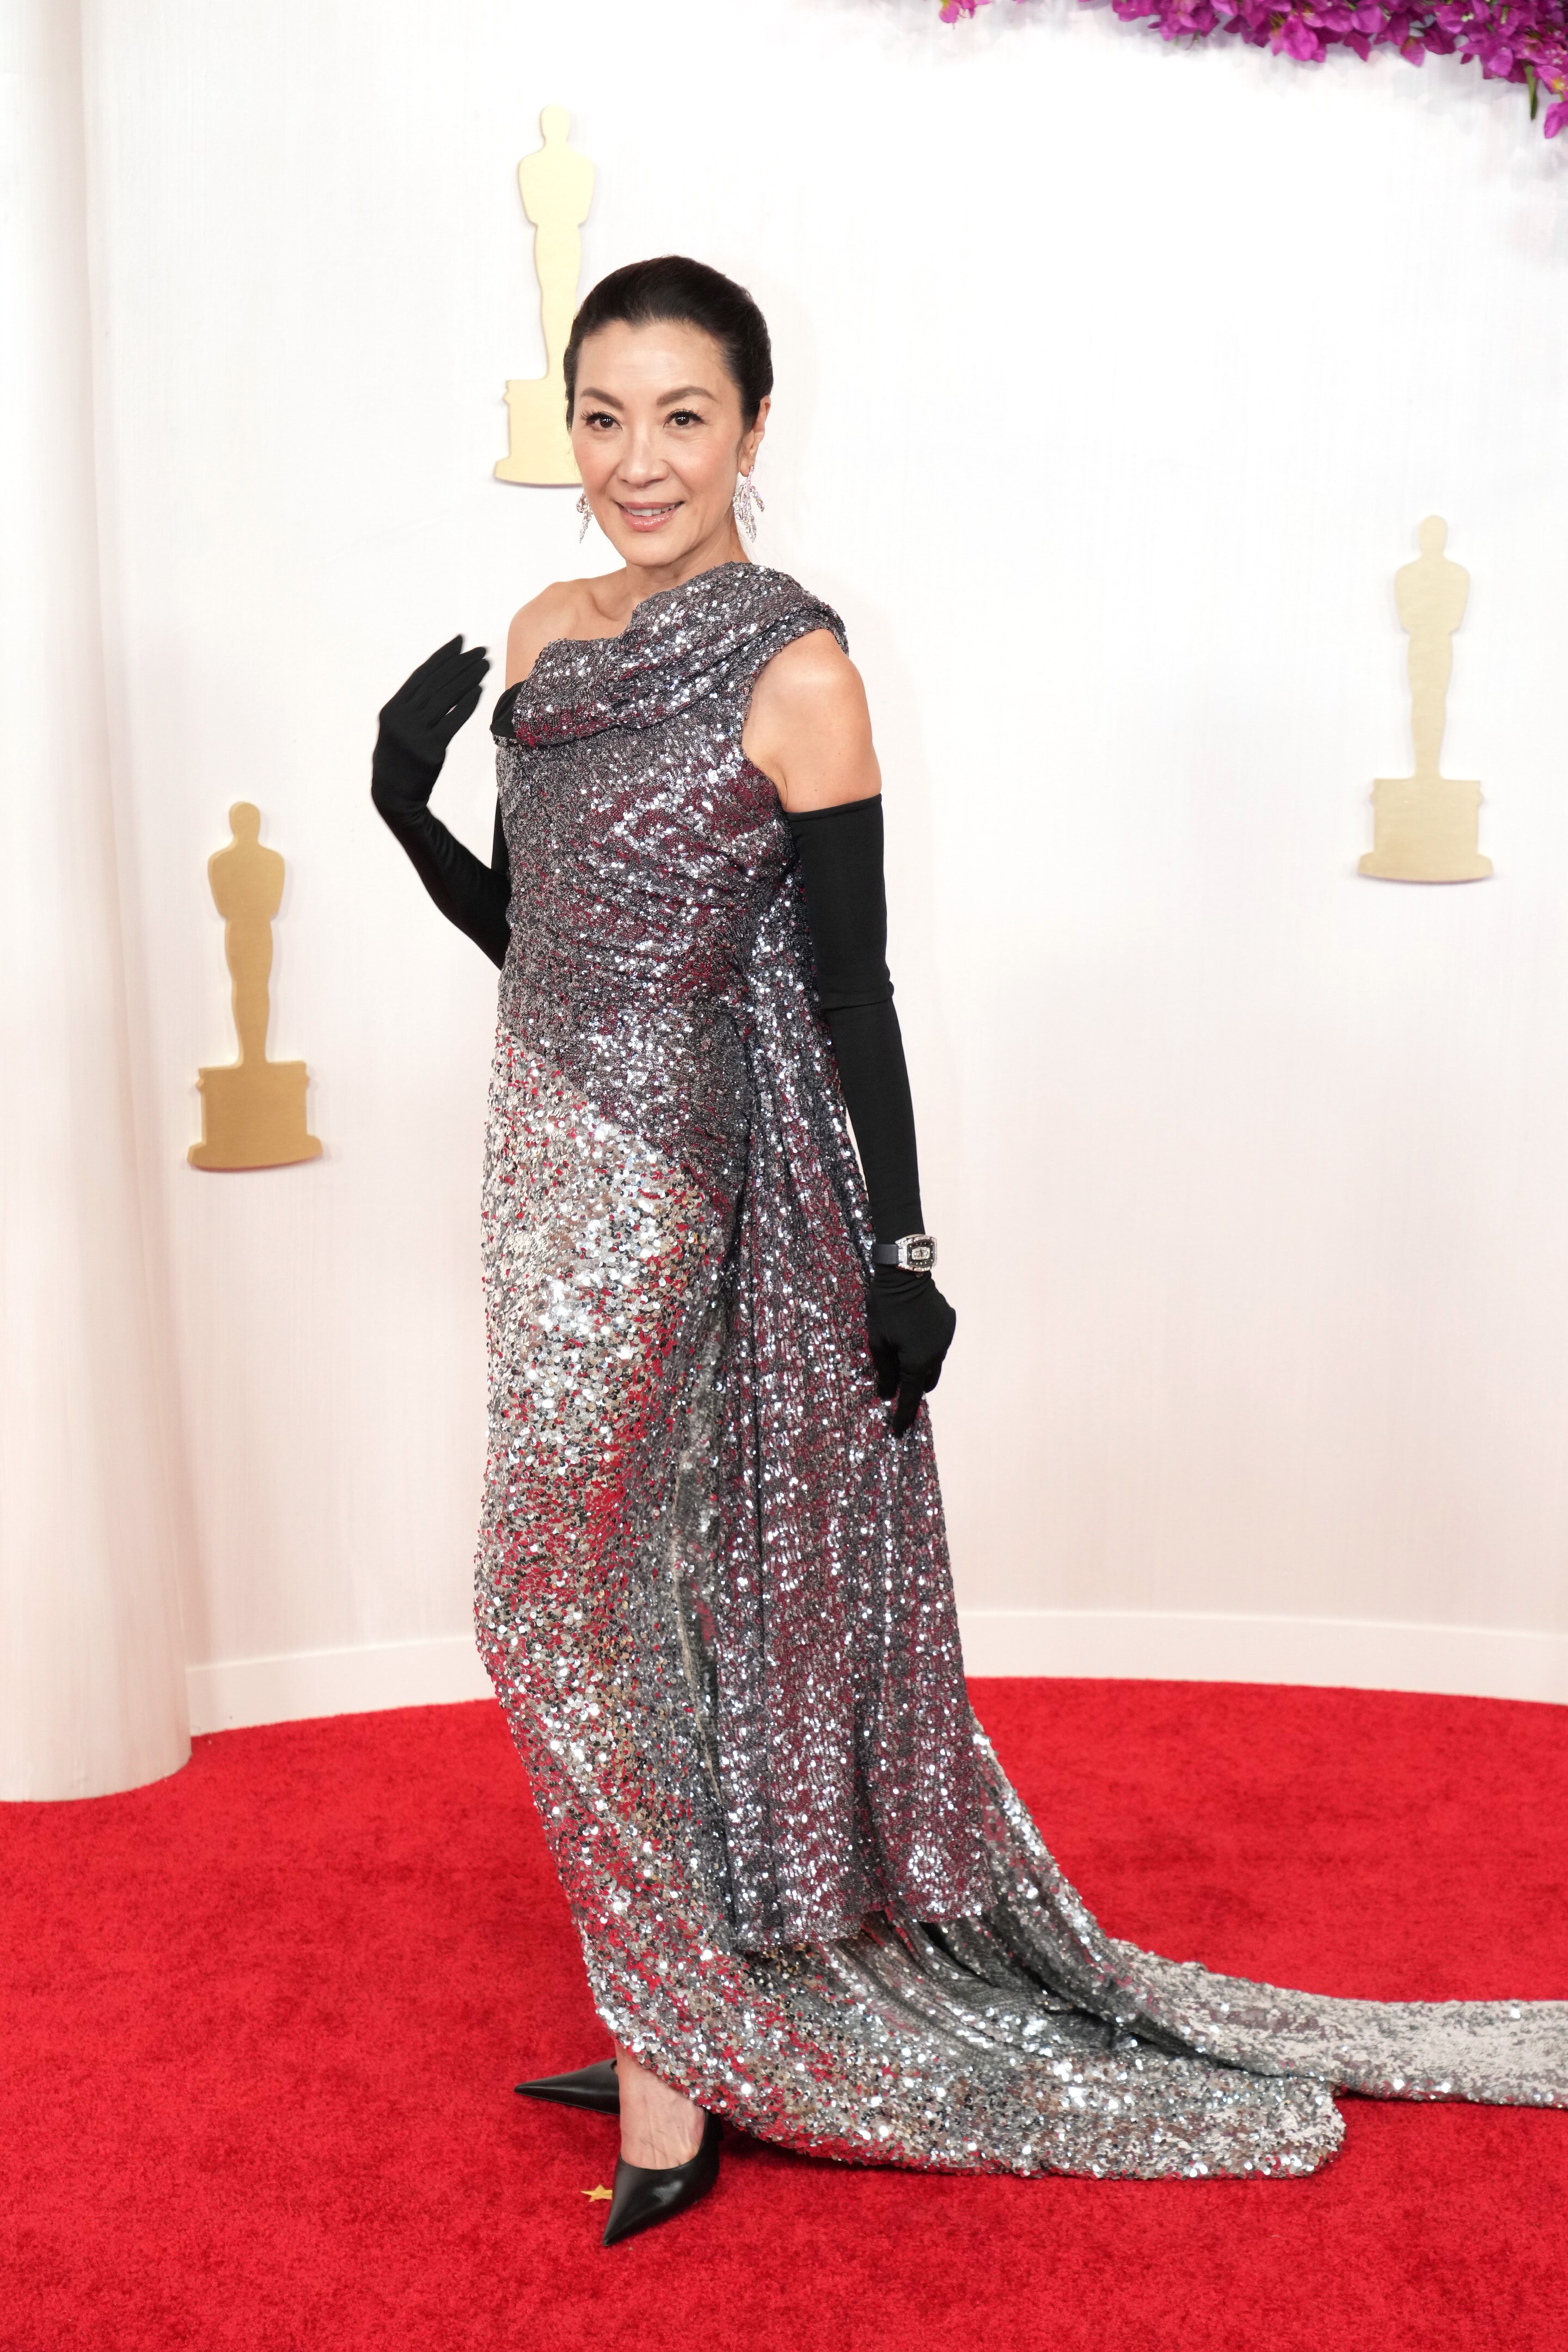 Michelle Yeoh in a shimmery silver dress with black arm sleeves on